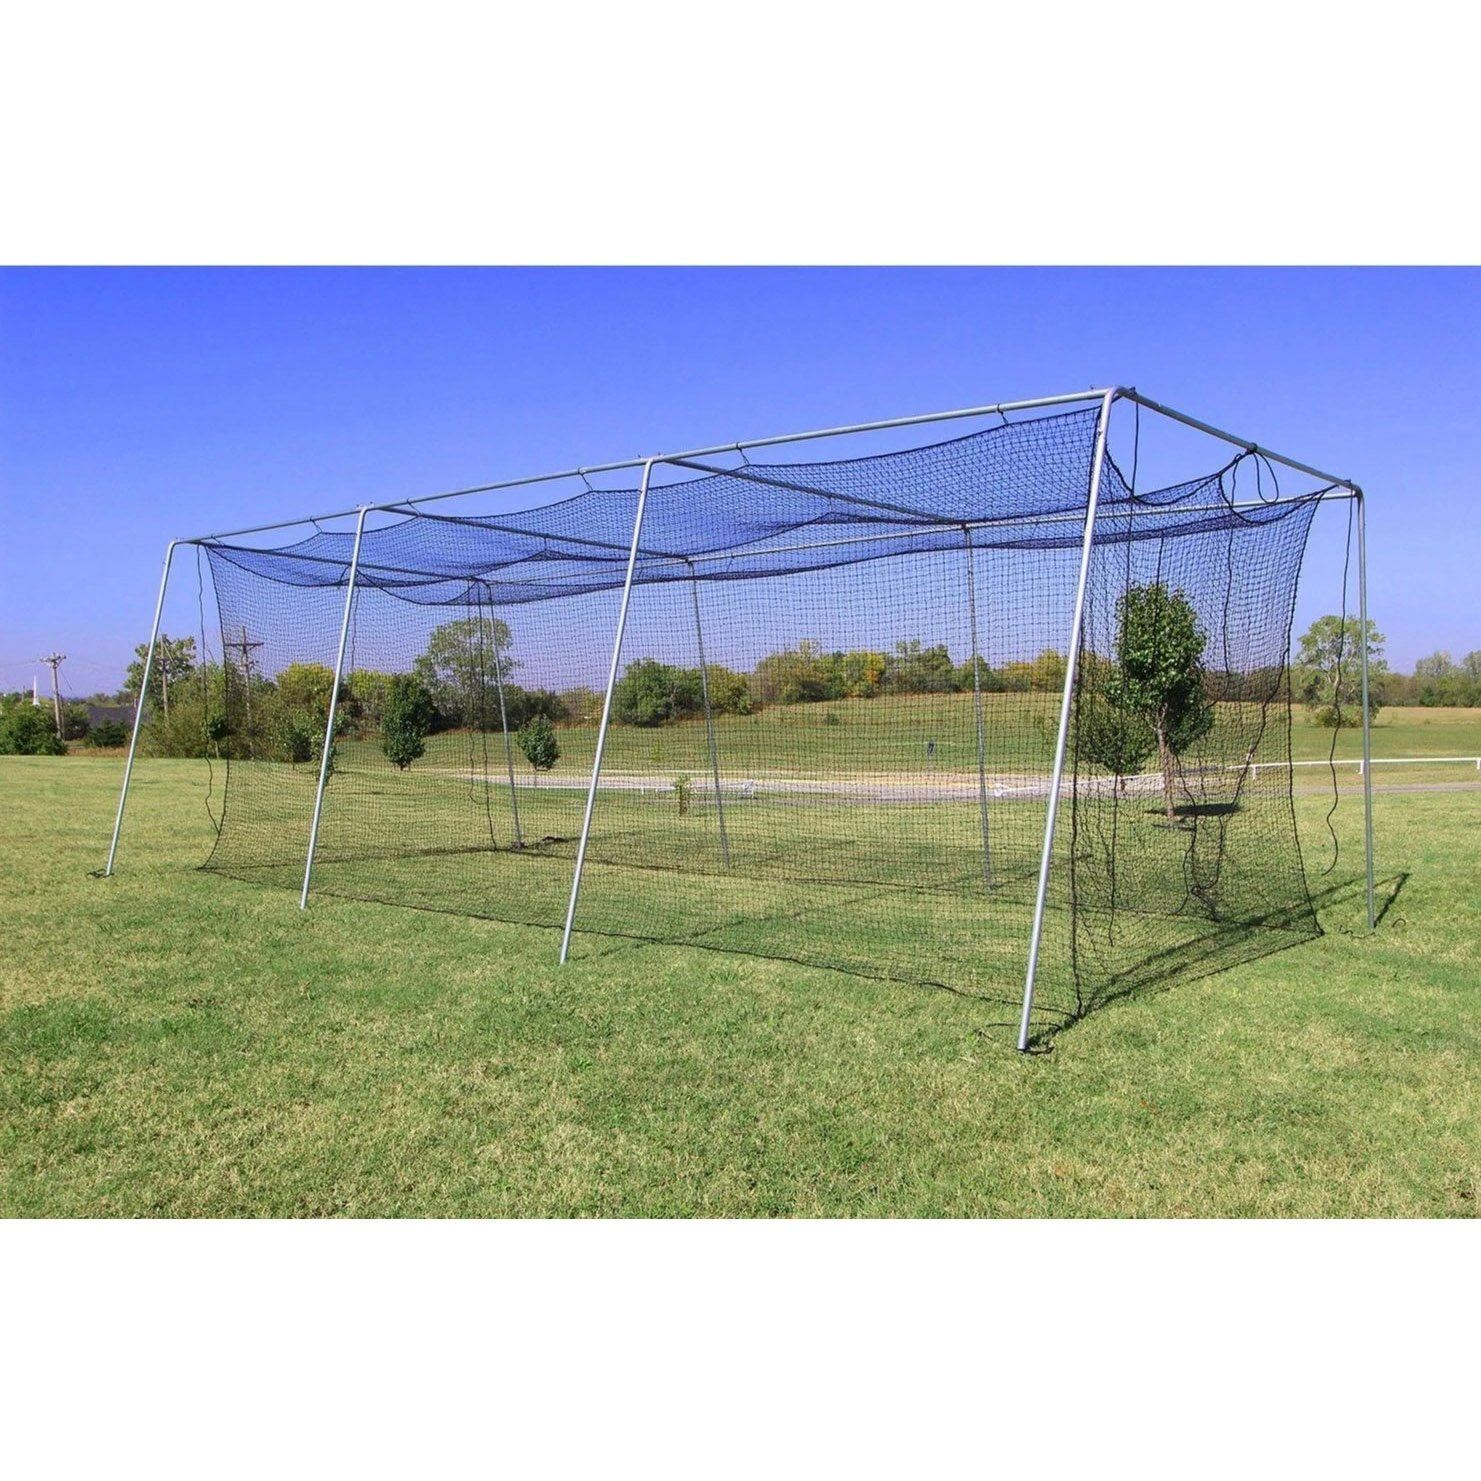 Cimarron Batting Cage With Complete Frame 30' - 70' #24 Poly